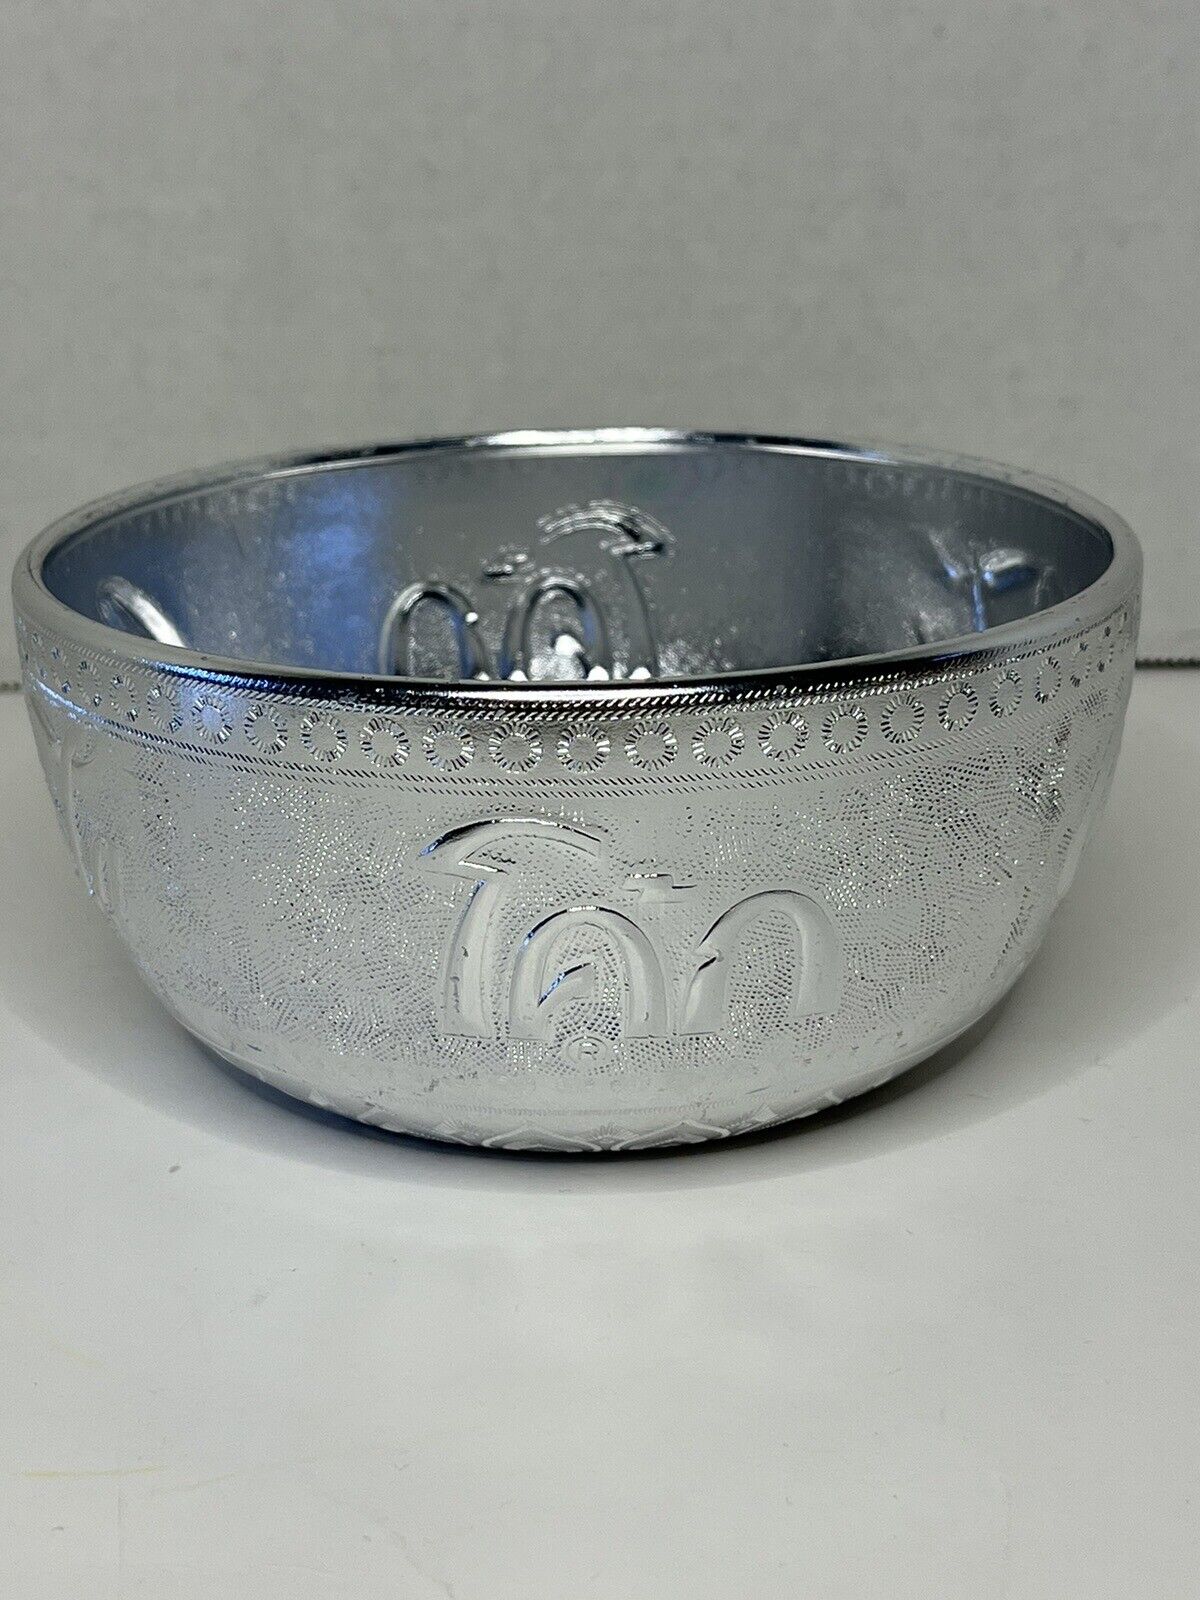 Vintage 70s Coca-Cola Aluminum Silver Bowl From Thailand